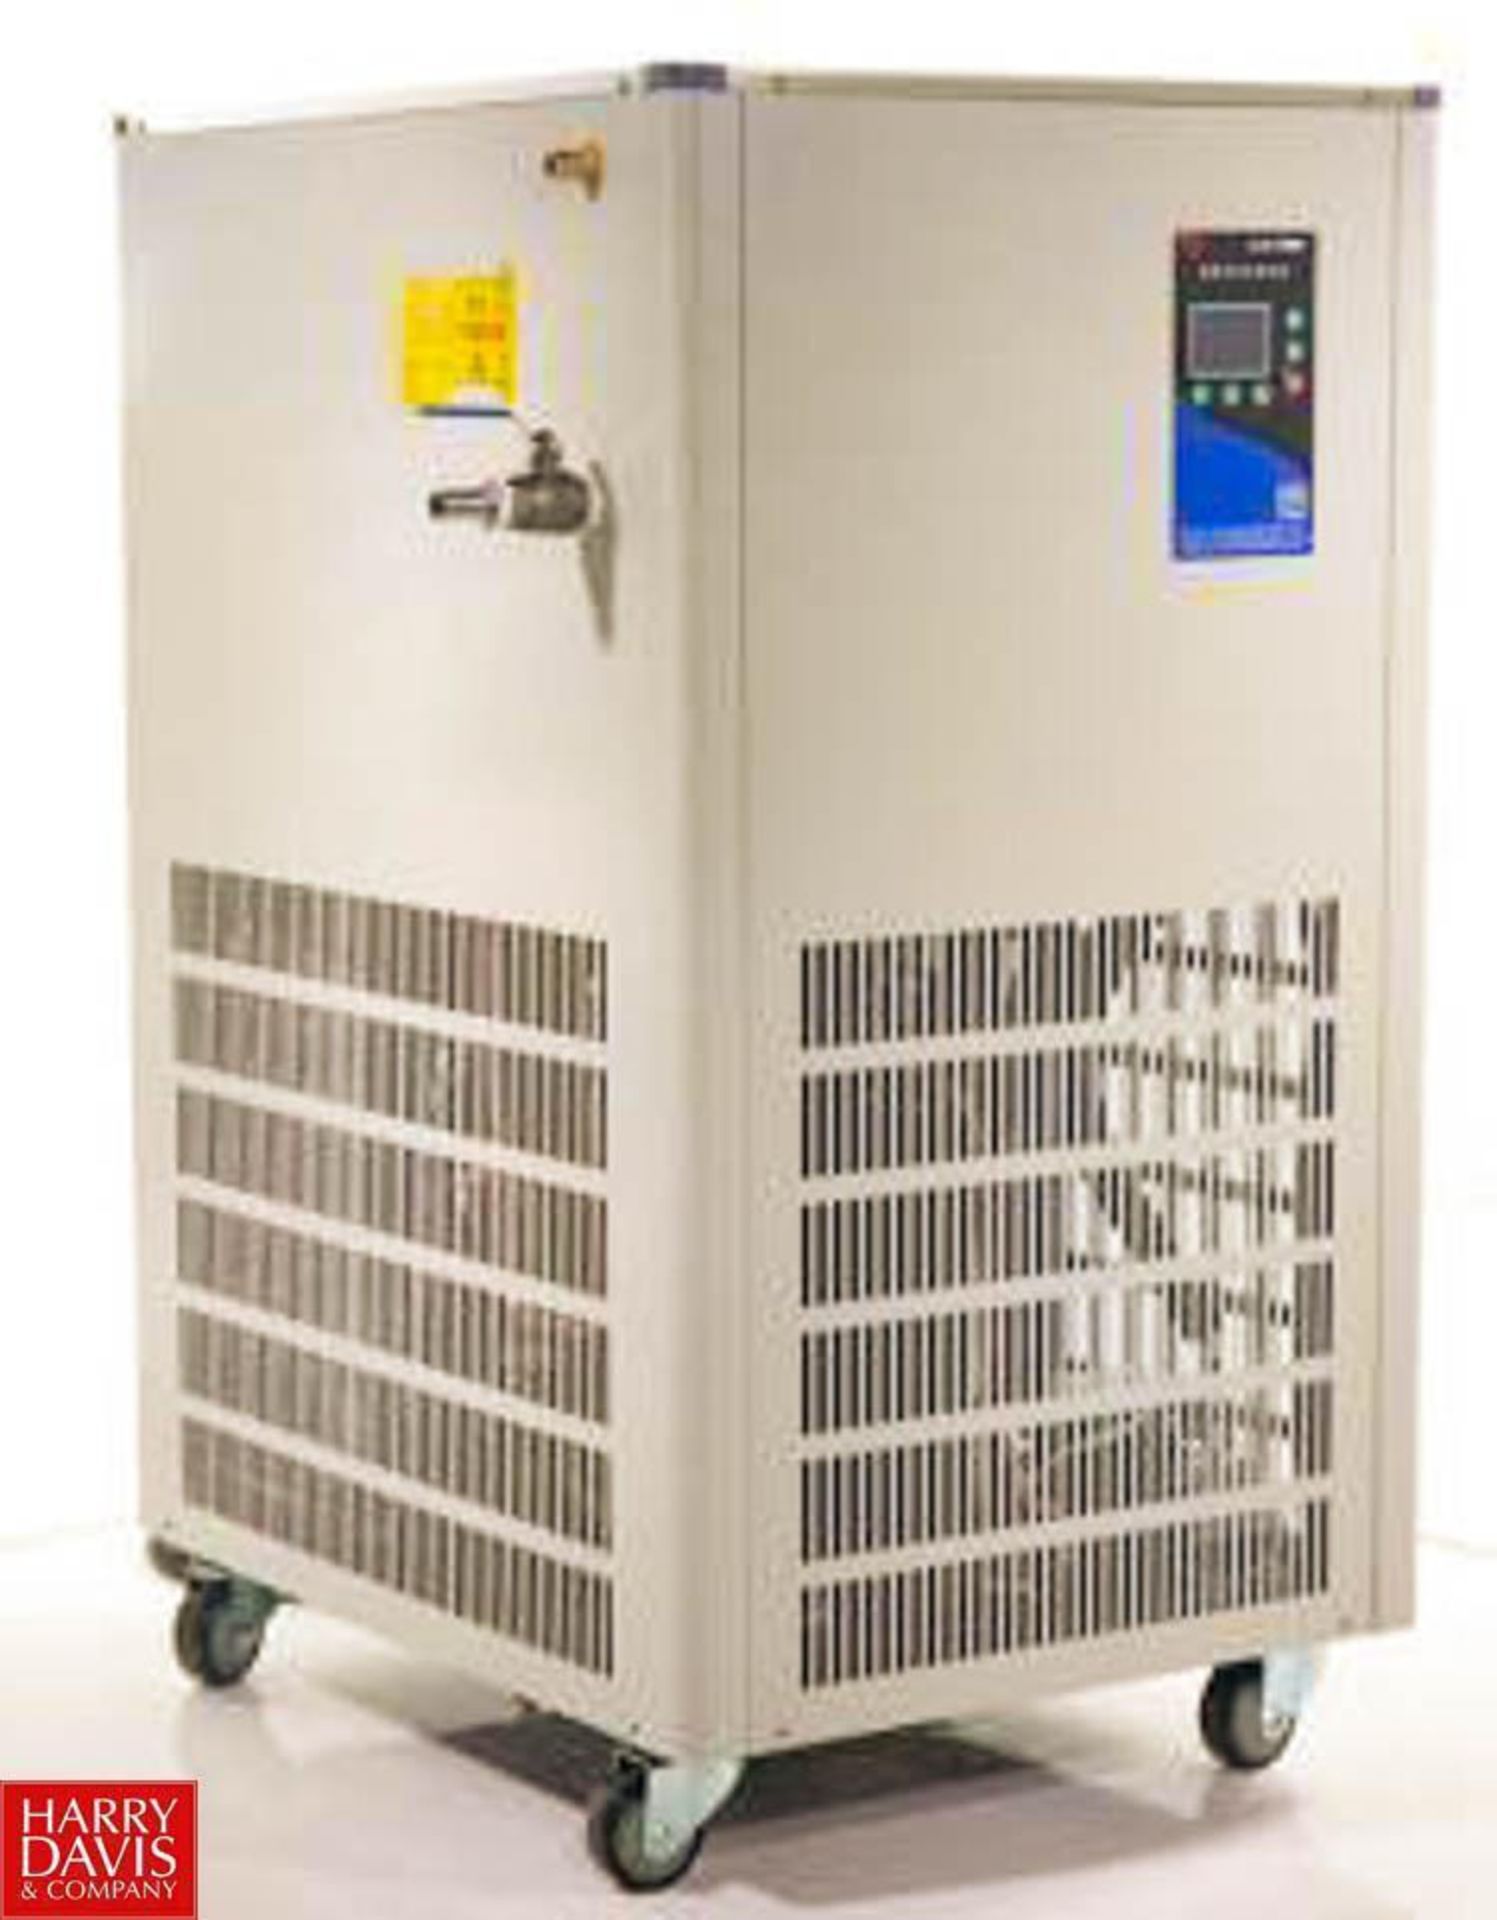 NEW Cryogenic Chiller - Rigging Fee: $100